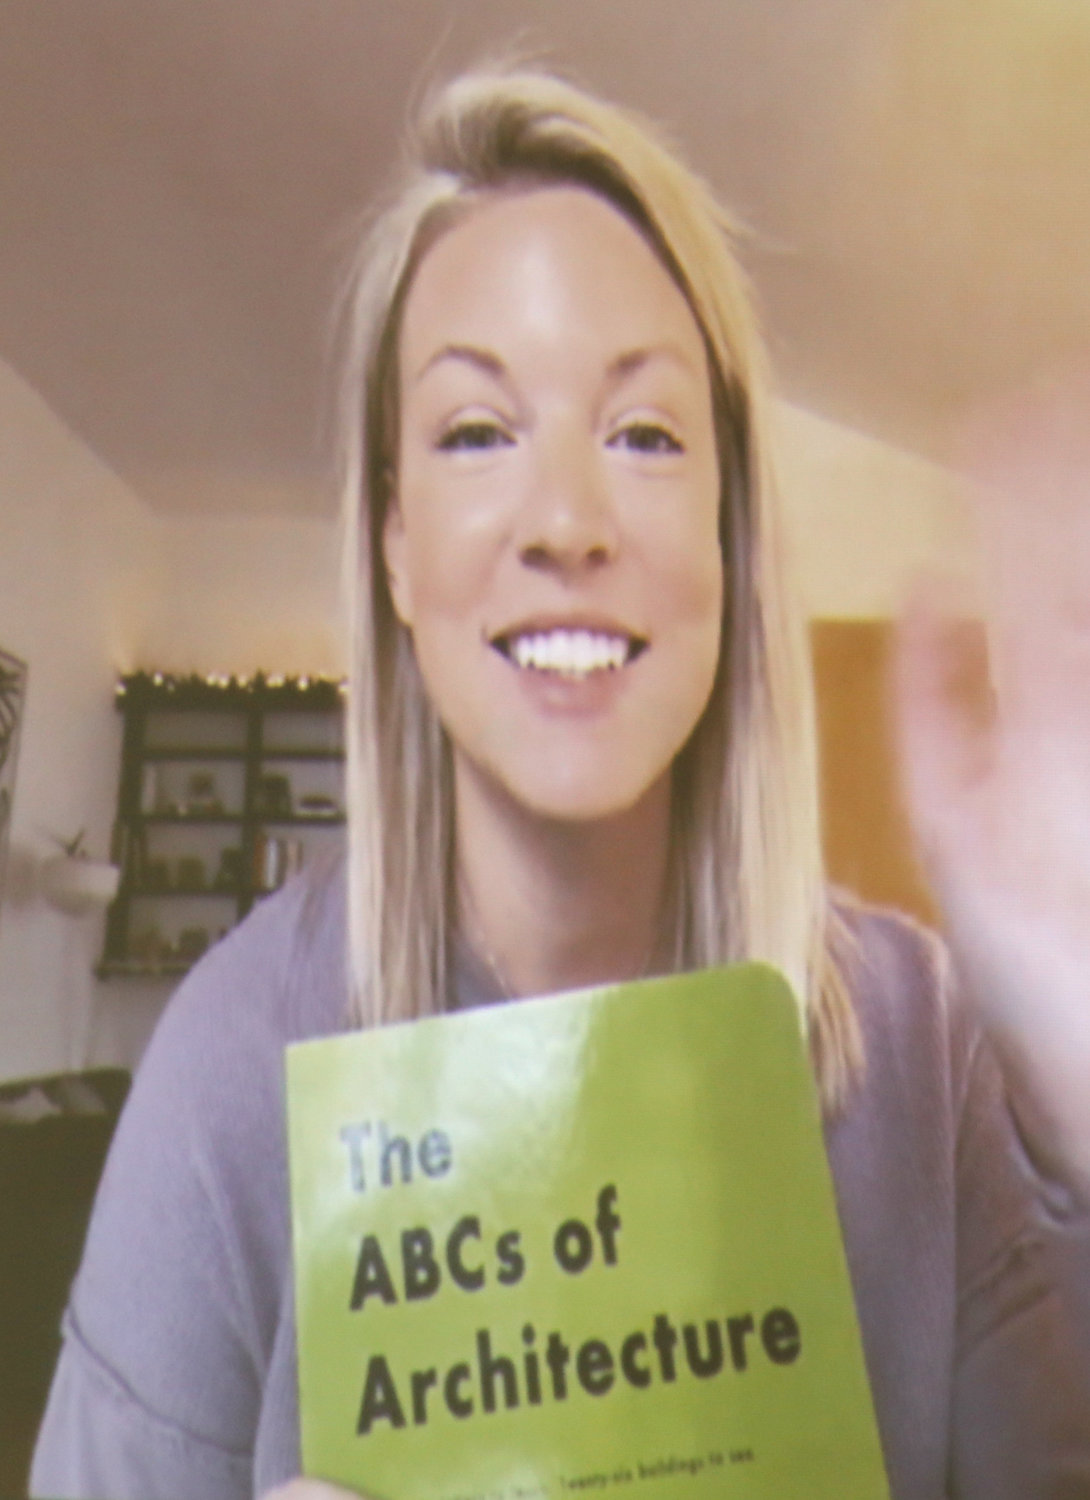 Chloe Doessel spoke to multiple Lone Tree elementary classes via Zoom about her book The ABC’s of Agriculture.